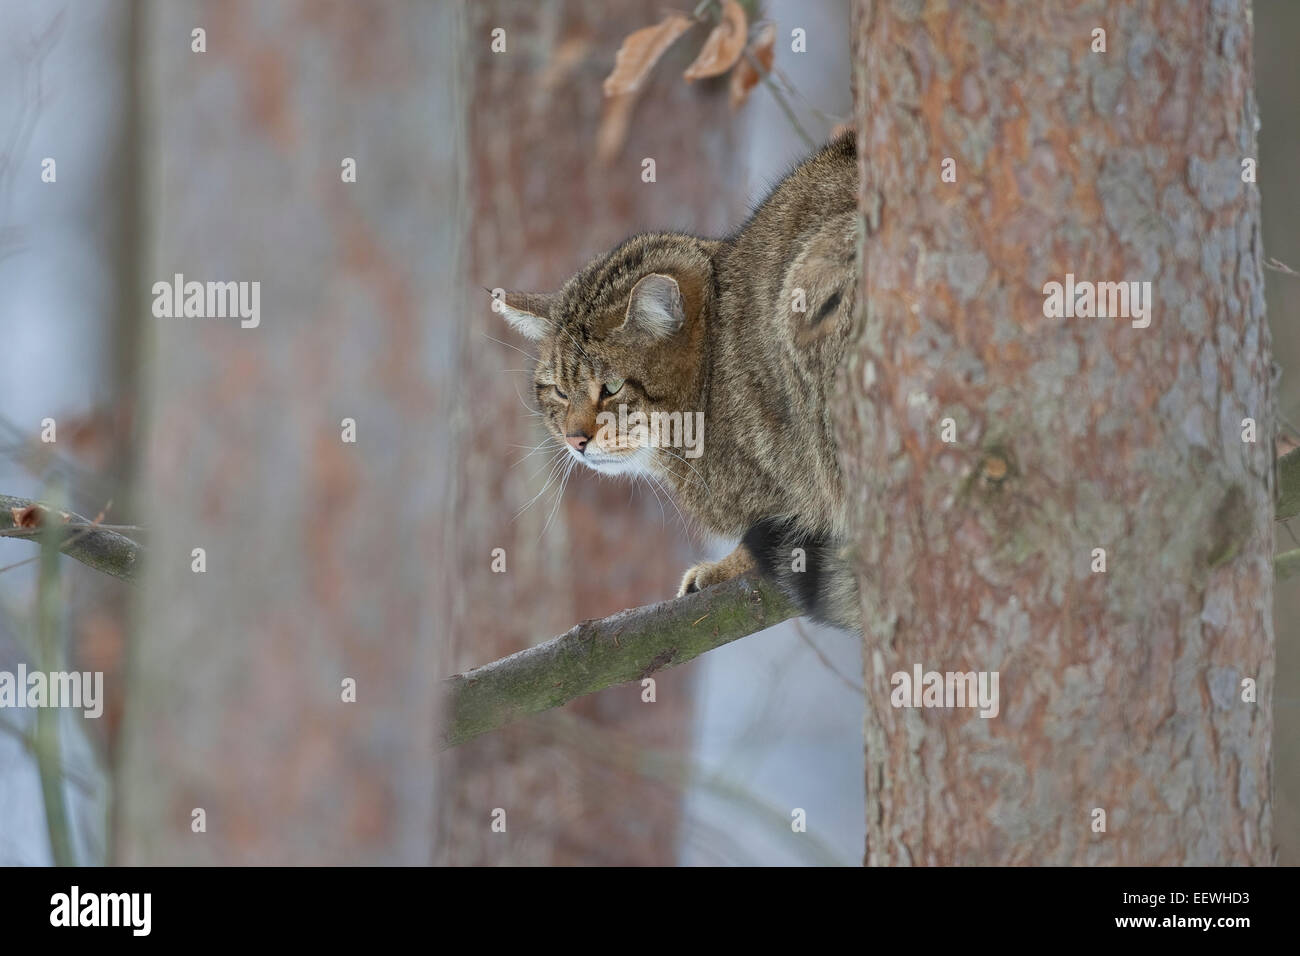 Wildkatze, Wildkatze, Wildkatze, Wild-Katze, Katze, Felis Silvestris, Chat Haret chat Sauvage Stockfoto